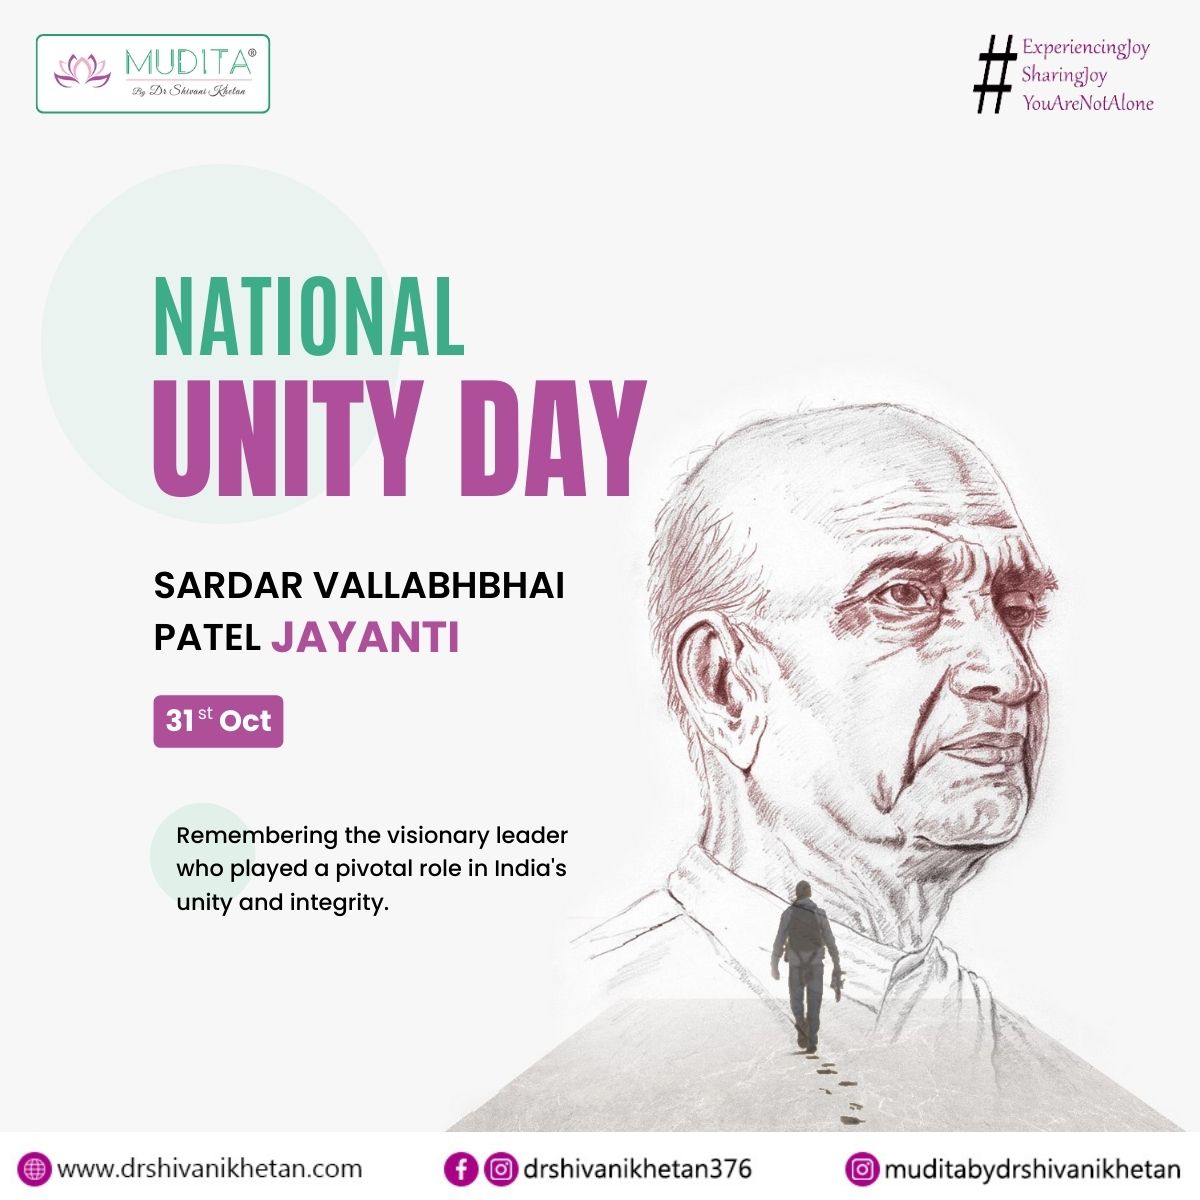 Honouring a true visionary, a catalyst of unity and strength. Their legacy continues to inspire us all, reminding us of the power of togetherness. #UnityInDiversity
#legacyofunity #visionaryleader #indiaunite #bharatekta #drshivanikhetan #mudita #experiencingjoy #sharingjoy